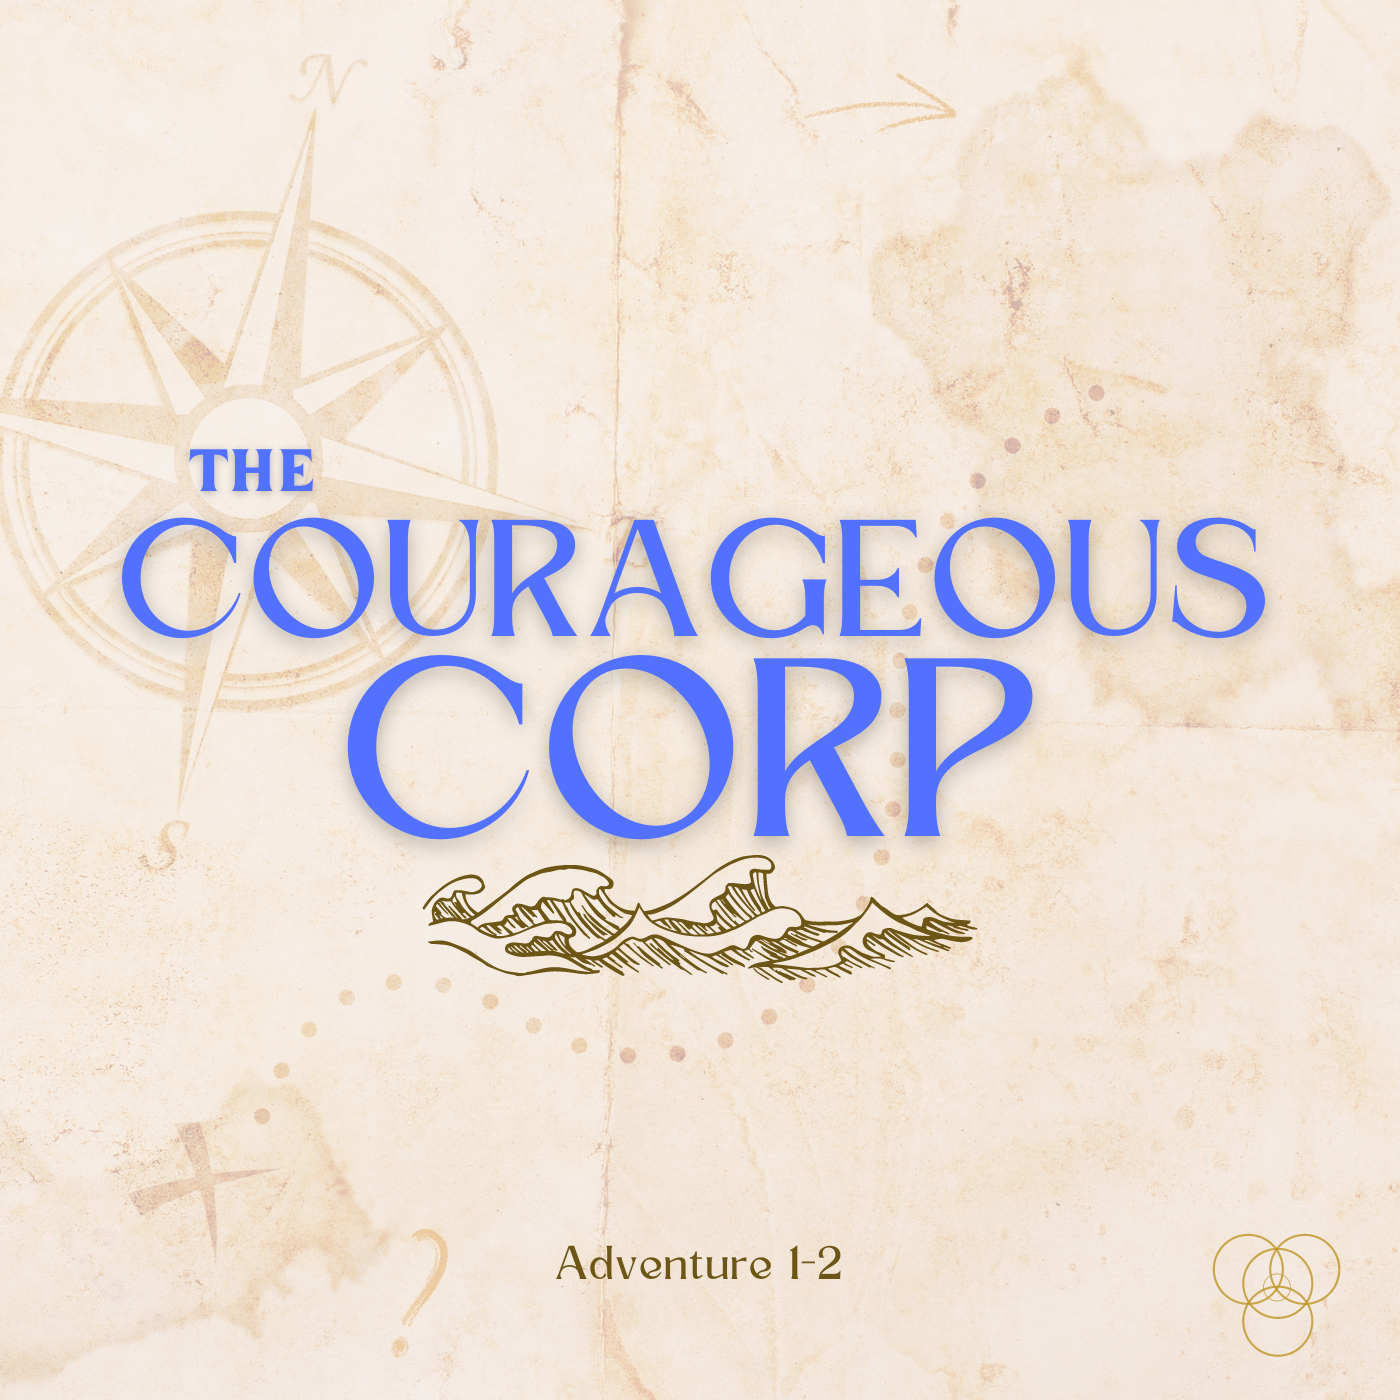 The Courageous Corp: Adventure 1-2